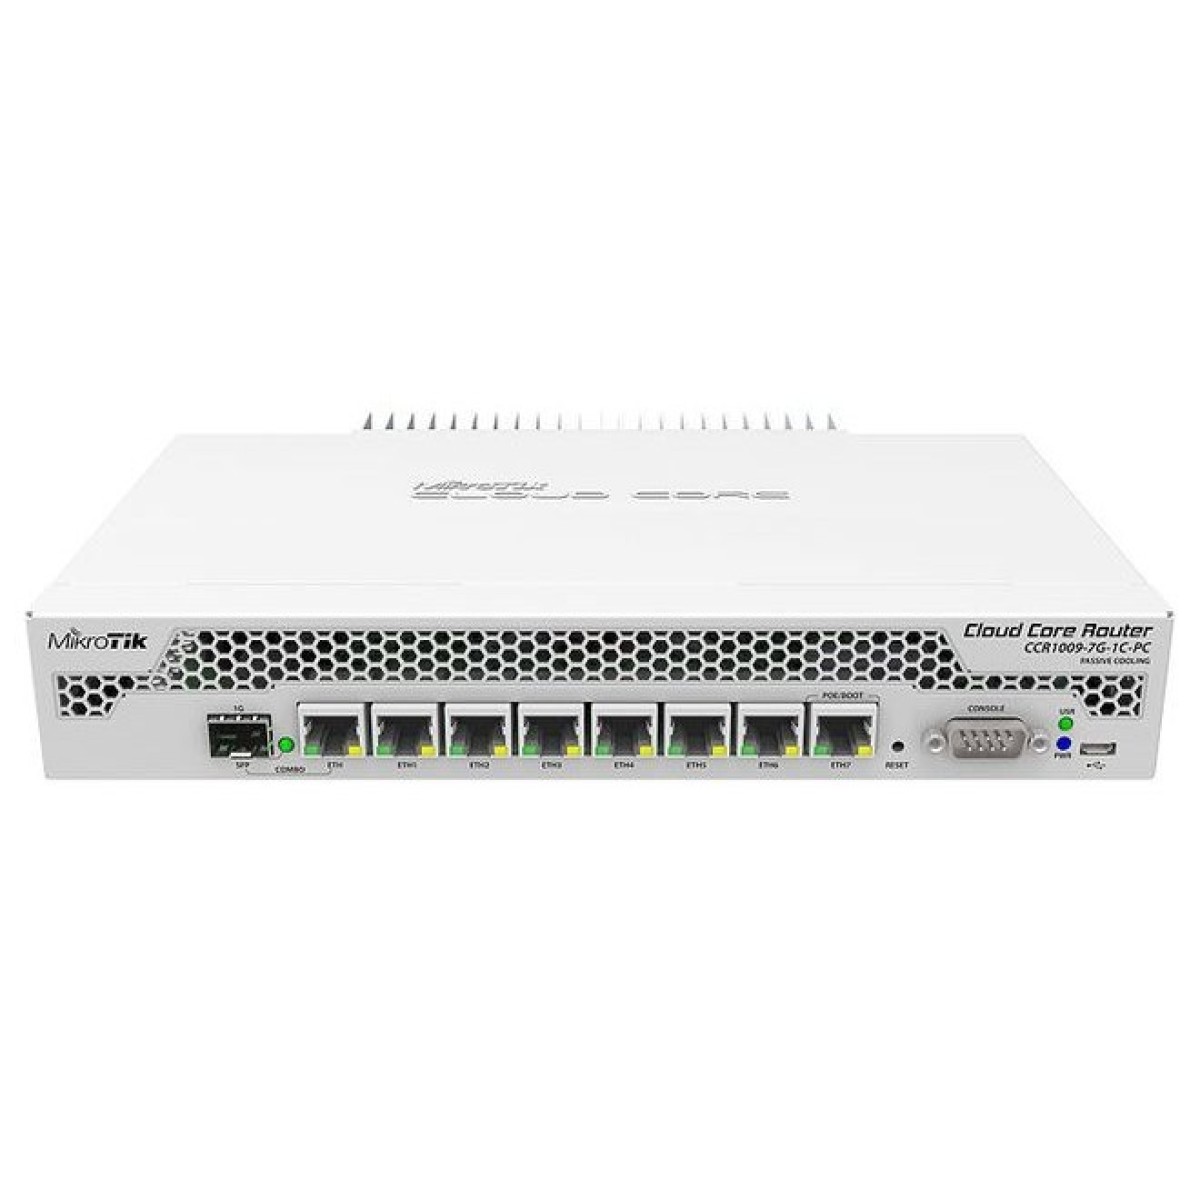 Маршрутизатор MikroTik Cloud Core Router (CCR1009-7G-1C-PC) 256_256.jpg